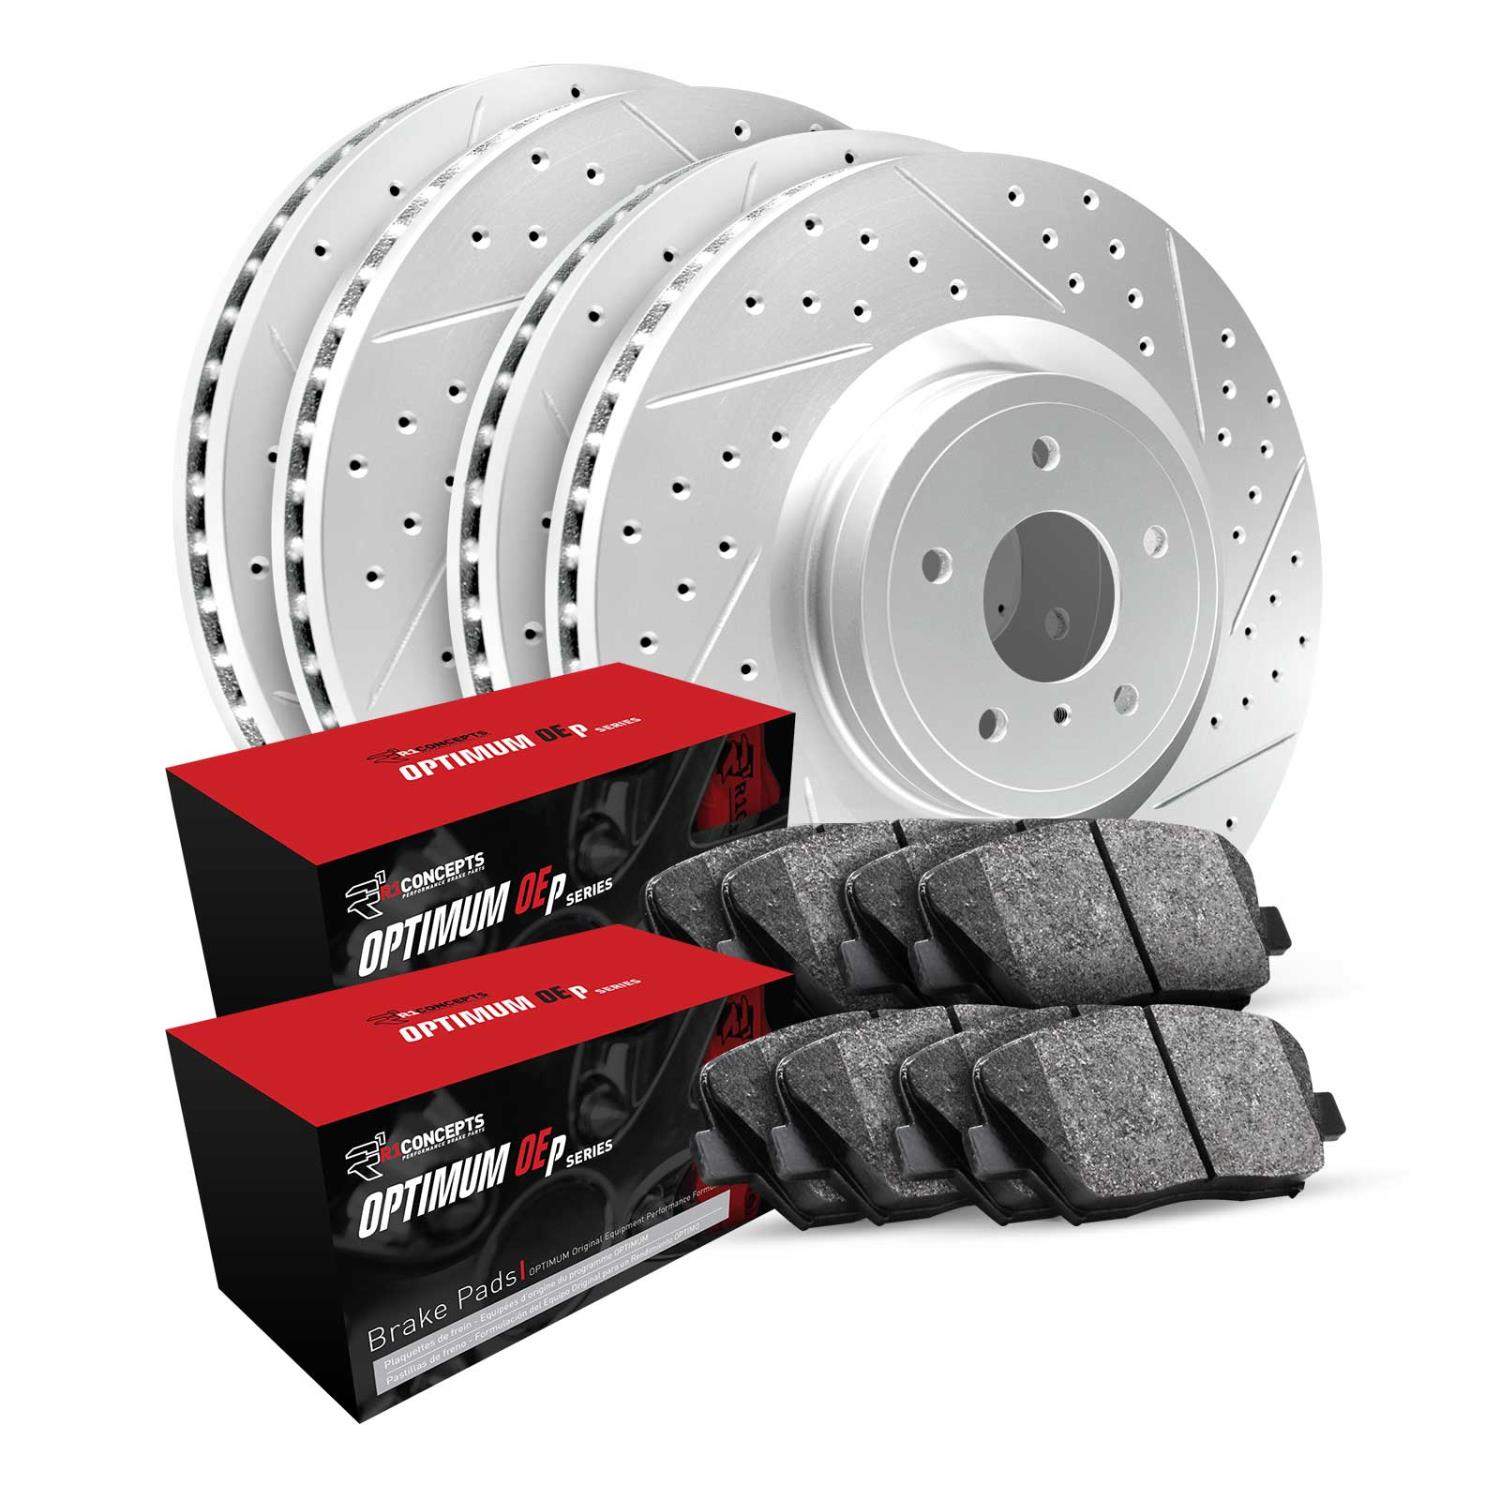 GEO-Carbon Drilled & Slotted Brake Rotor Set w/Optimum OE Pads, Fits Select Fits Multiple Makes/Models, Position: Front & Rear